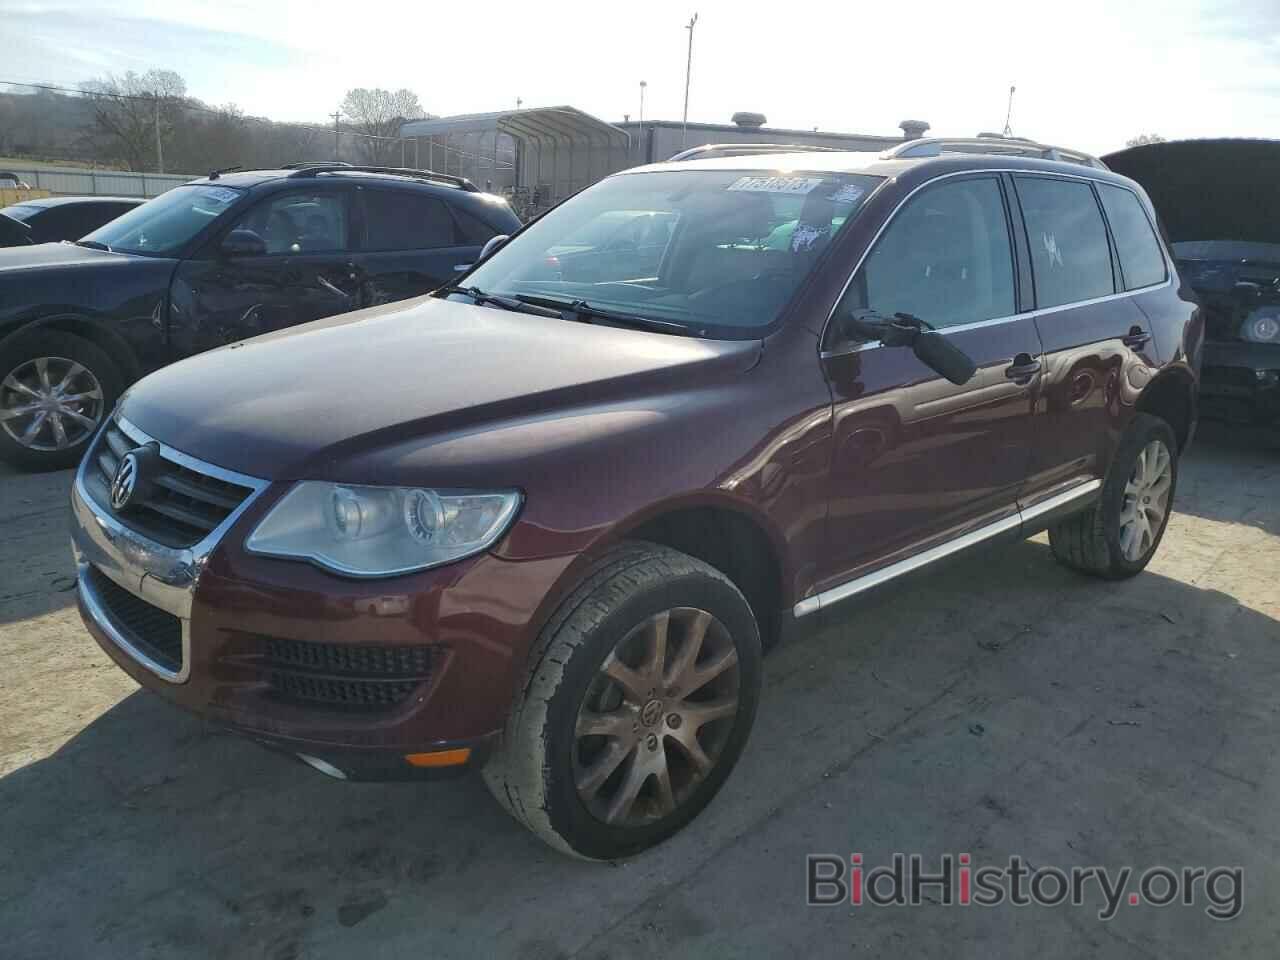 Photo WVGFK7A94AD003970 - VOLKSWAGEN TOUAREG TD 2010